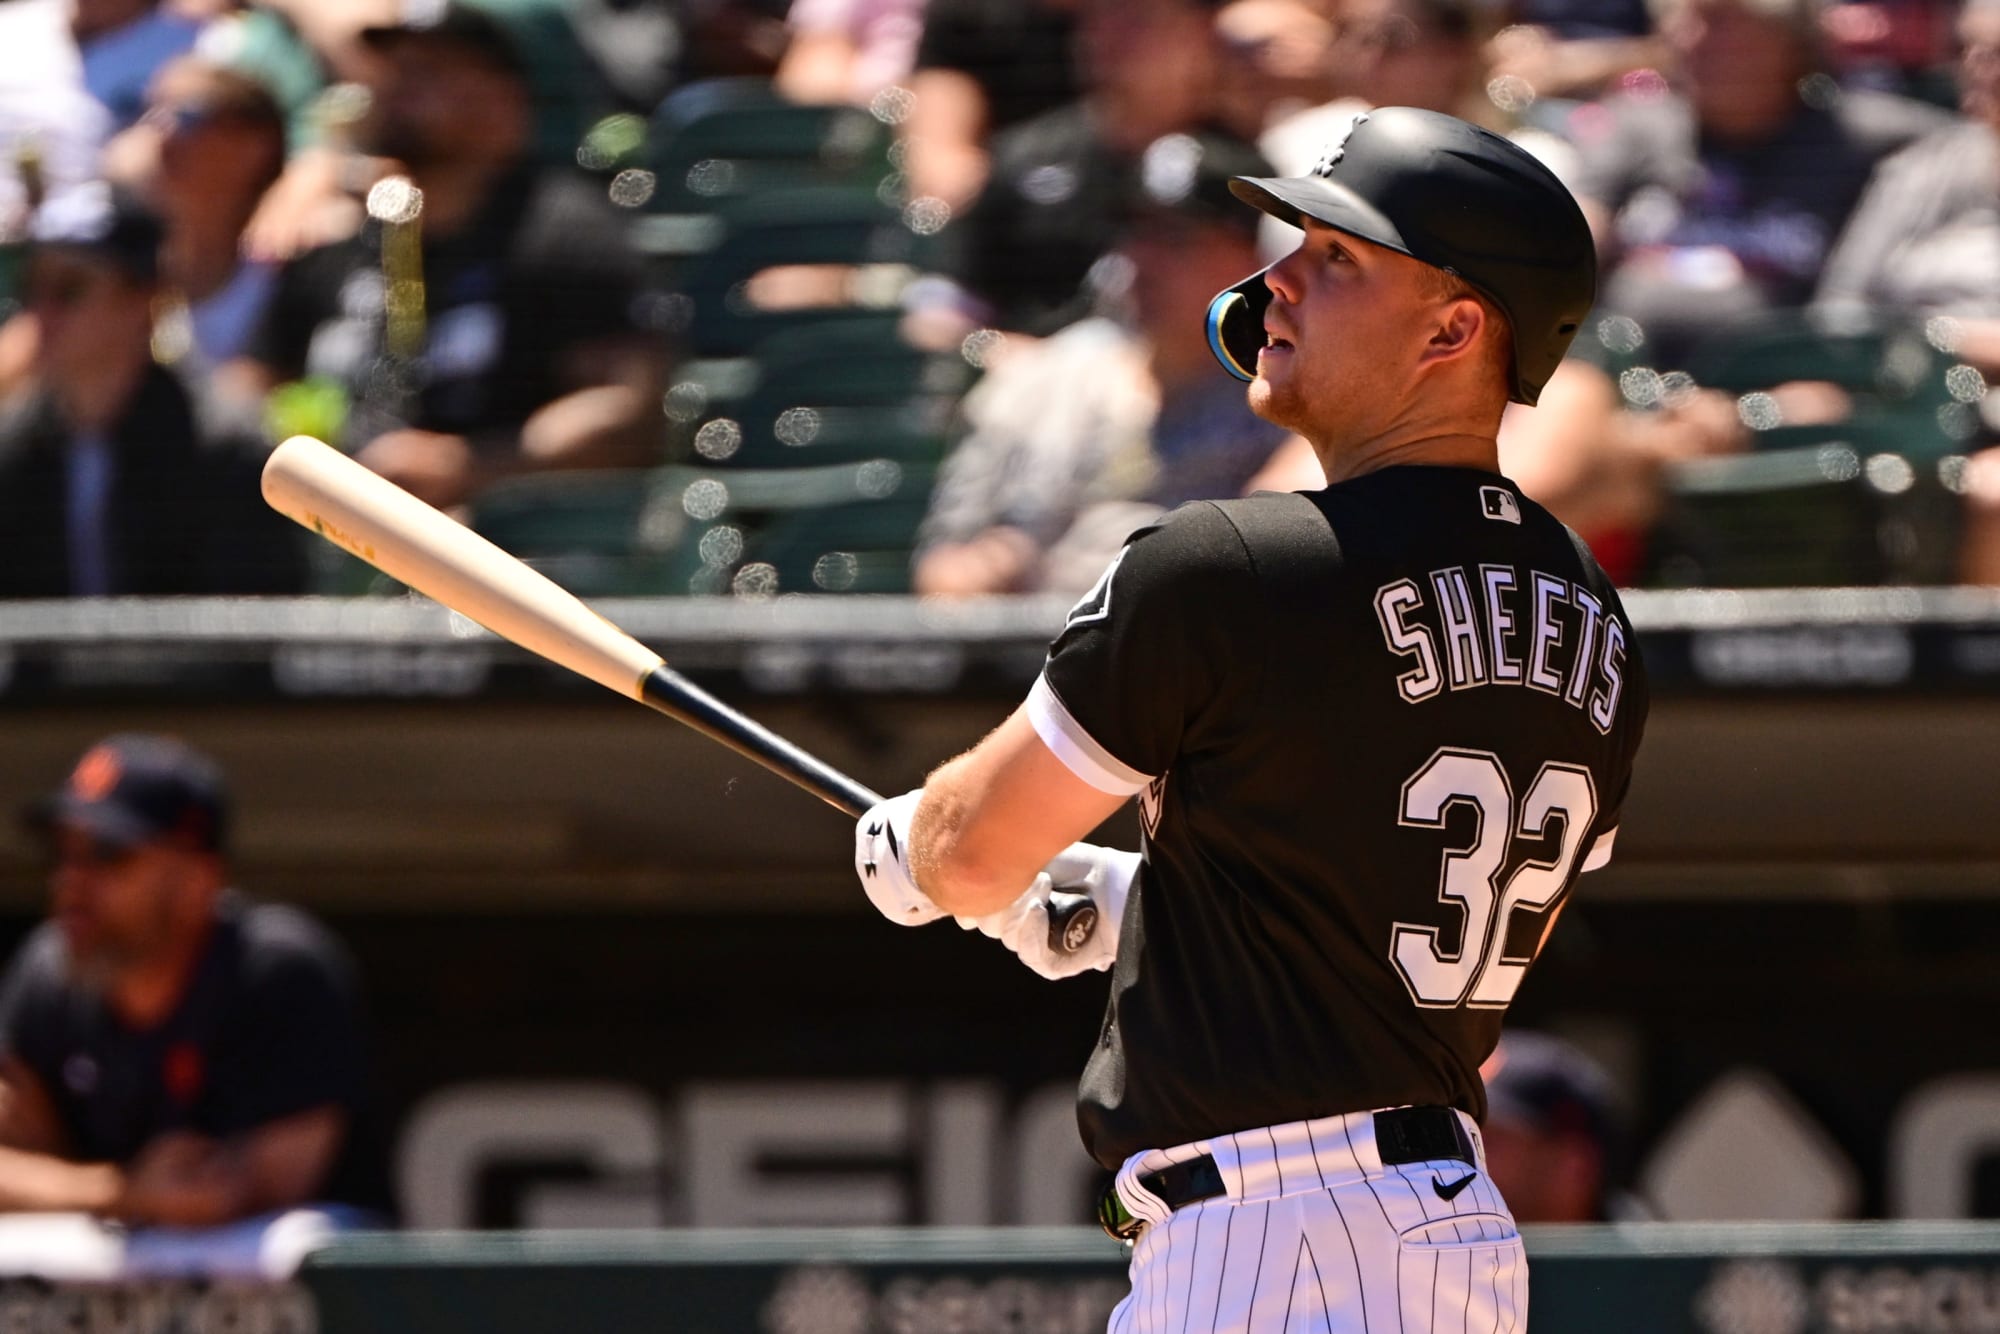 Chicago White Sox' Gavin Sheets: “We've got to find a way”